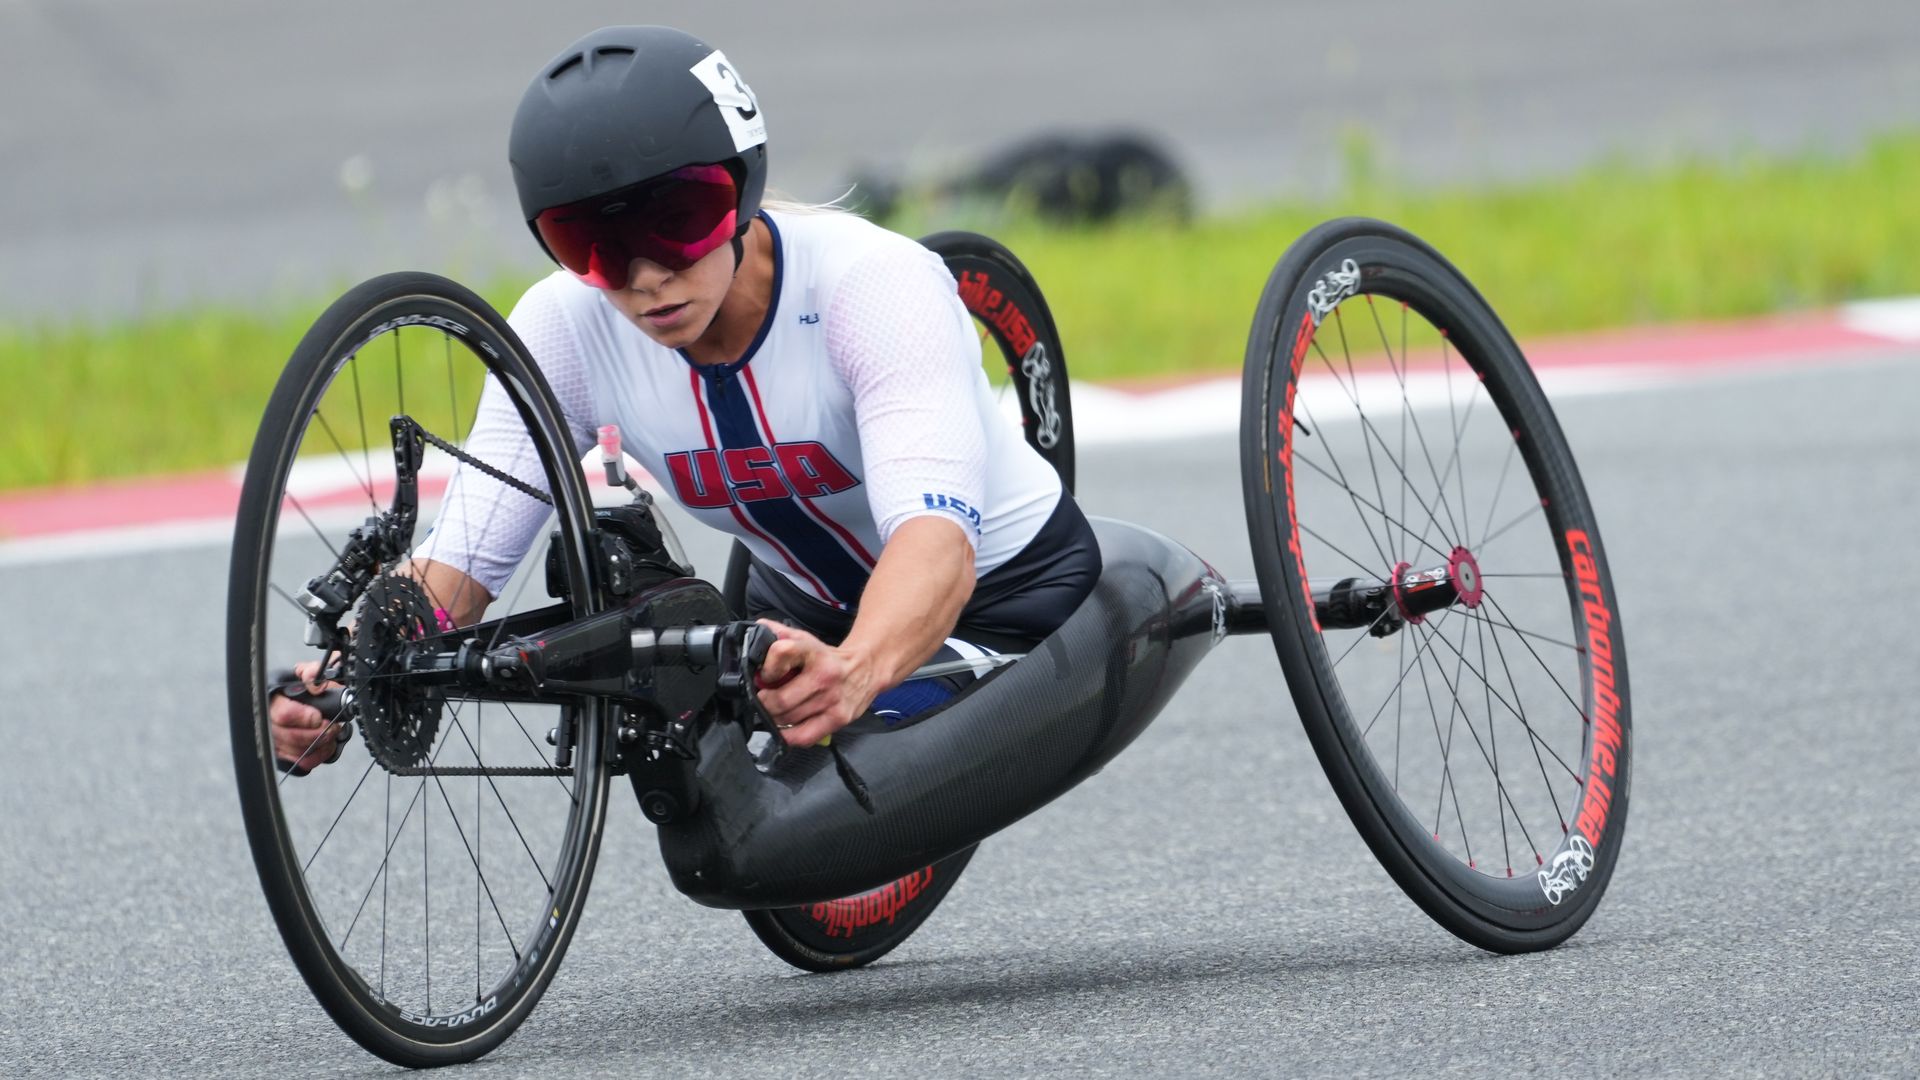 :Oksana Masters of Team United States competes during Cycling Road Women’s H4-5 Time Trial on day 7 of the Tokyo 2020 Paralympic Games at Fuji International Speedway on August 31, 2021 in Tokyo